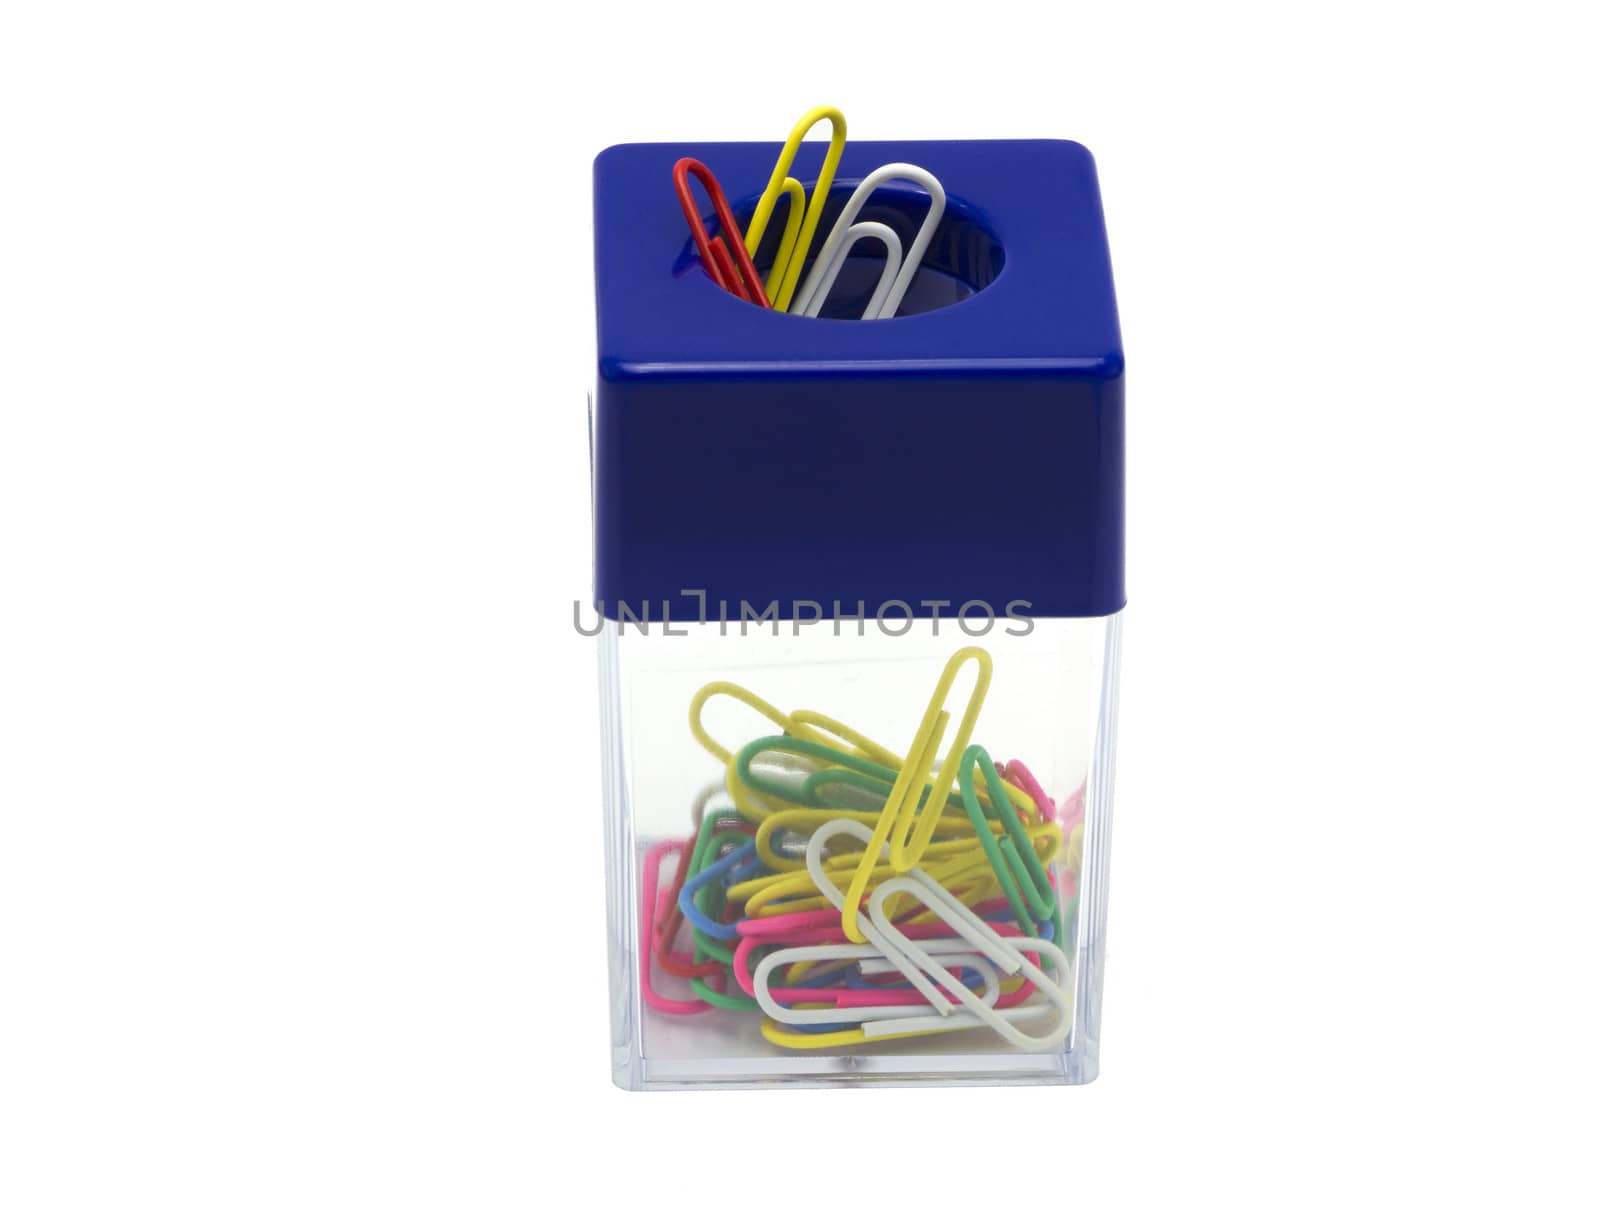 Paper clip box with a magnet by jurgenfr